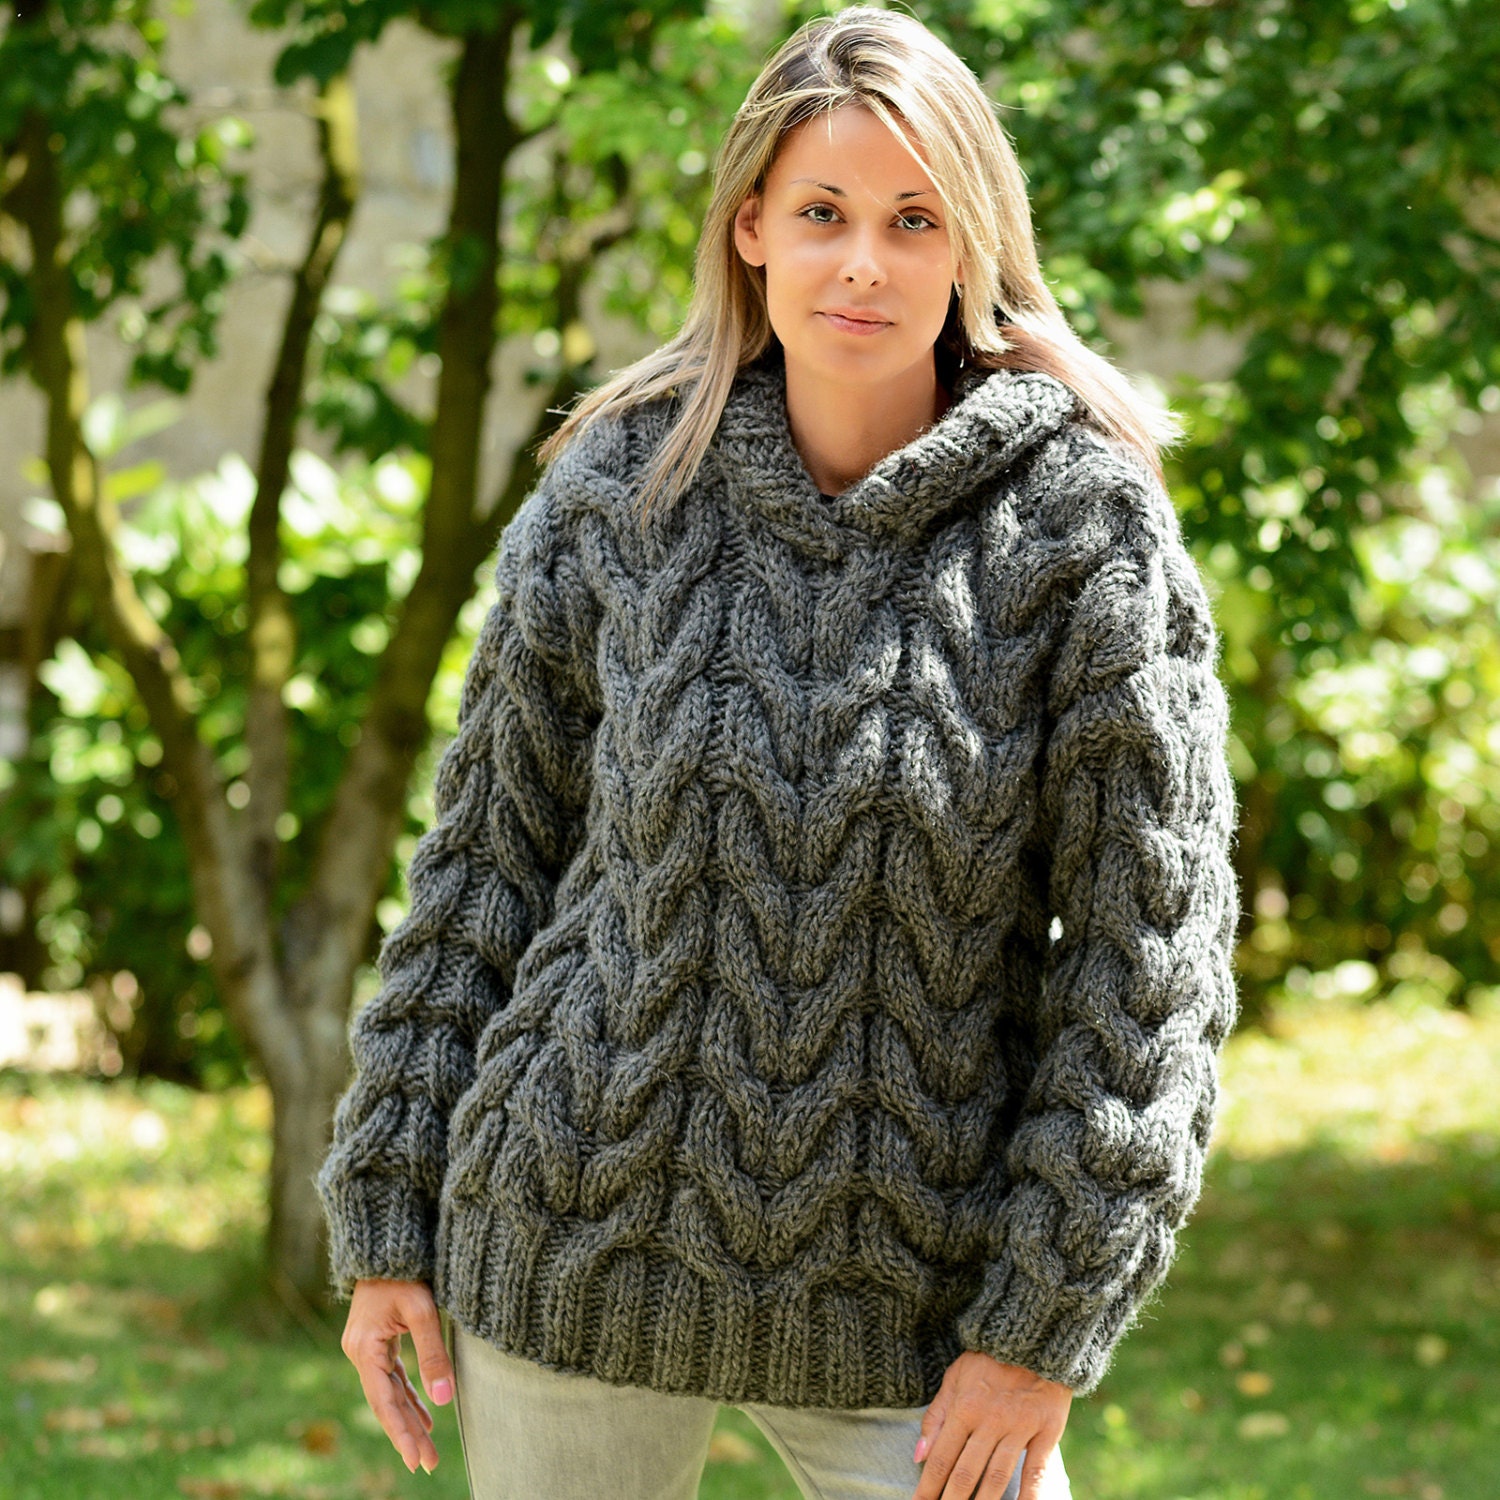 Super Thick Cable Hand Knit 100% WOOL Hooded Sweater Dark Grey Fuzzy ...